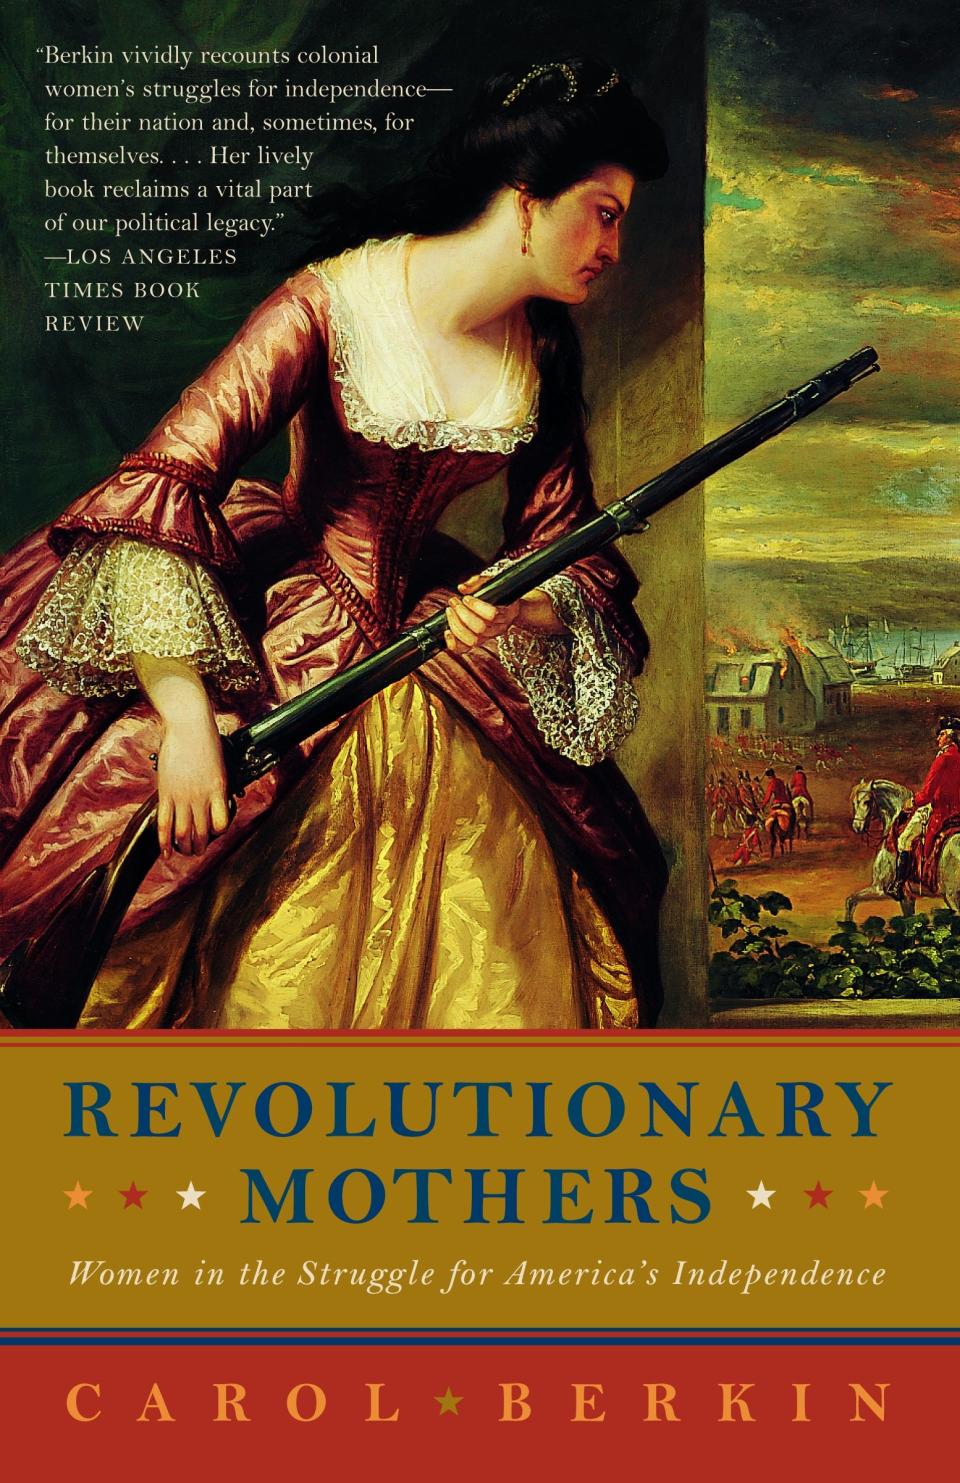 "Revolutionary Mothers: Women in the Struggle for America’s Independence," by Carol Berkin